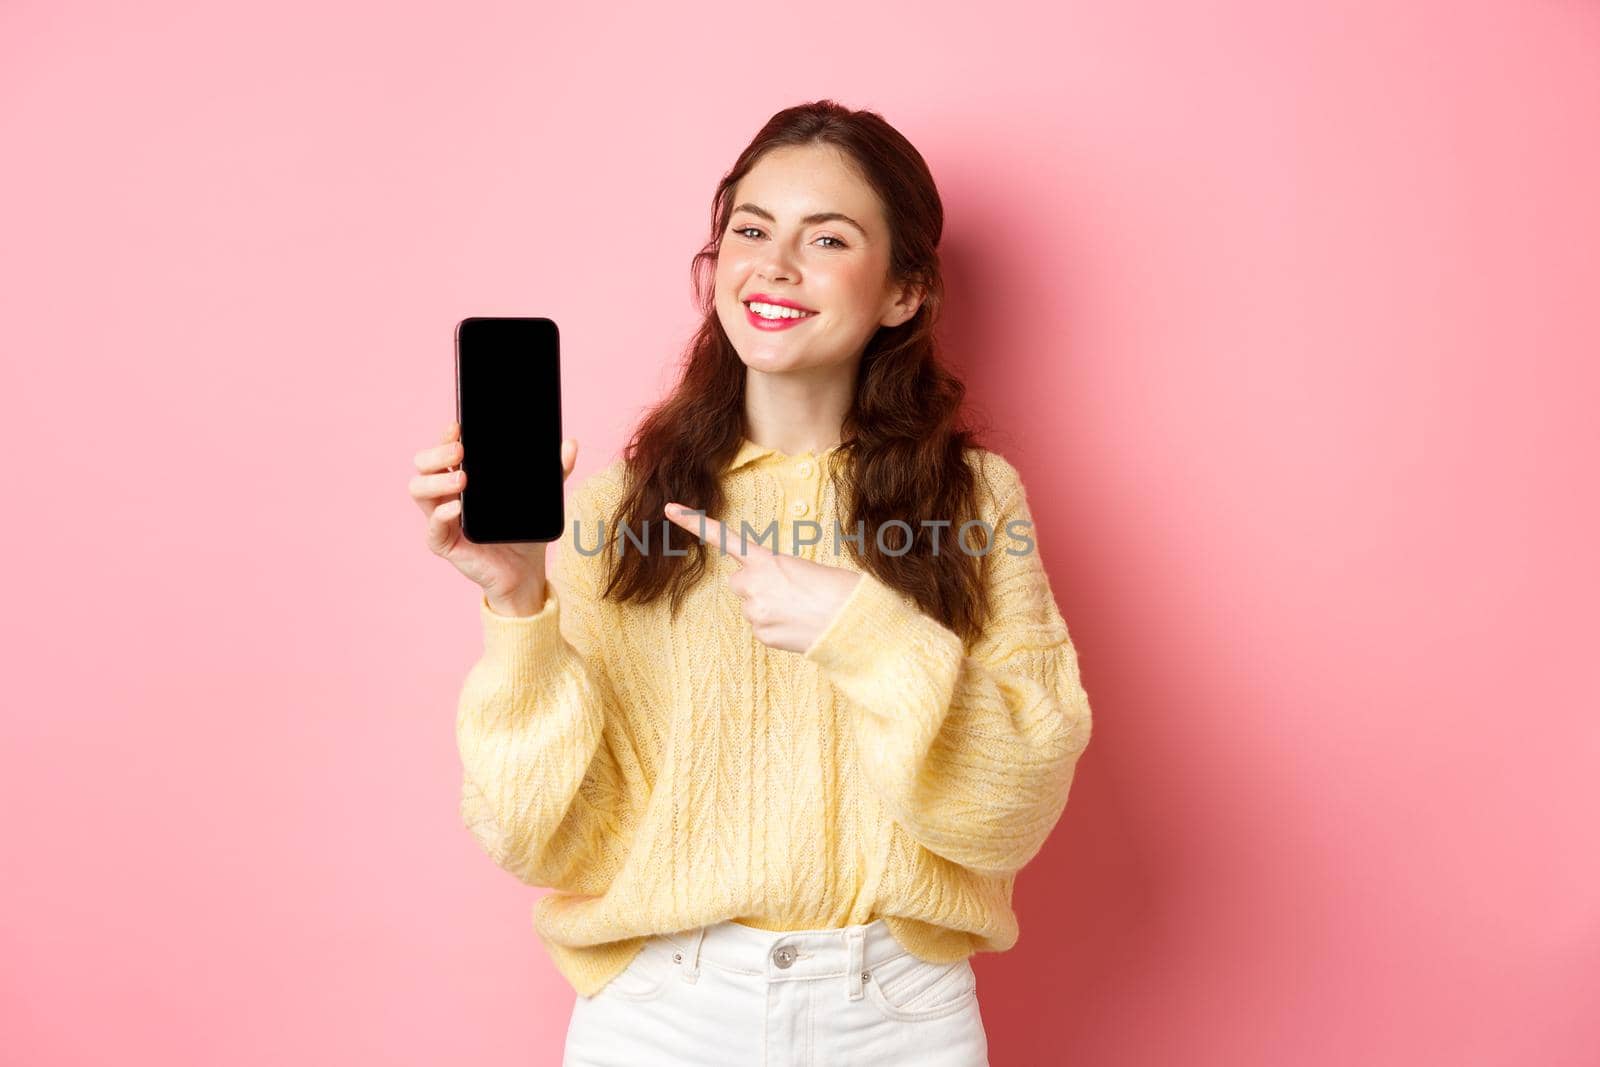 Portrait of attractive young woman demonstrates promo on phone, pointing finger at smartphone and smiling, standing against pink background.